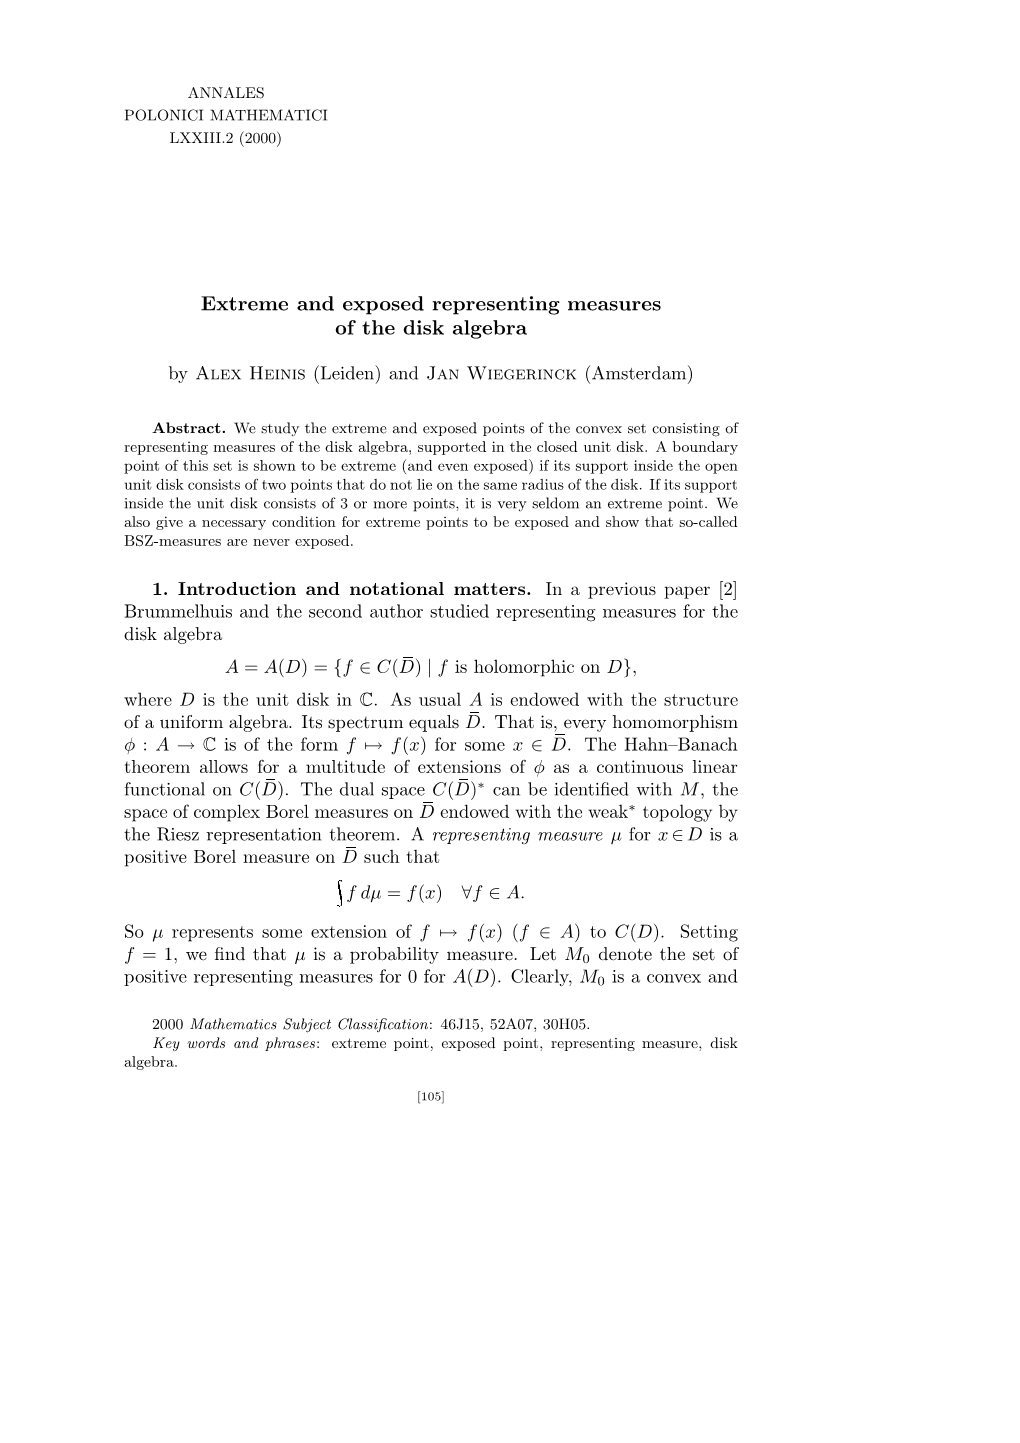 Extreme and Exposed Representing Measures of the Disk Algebra